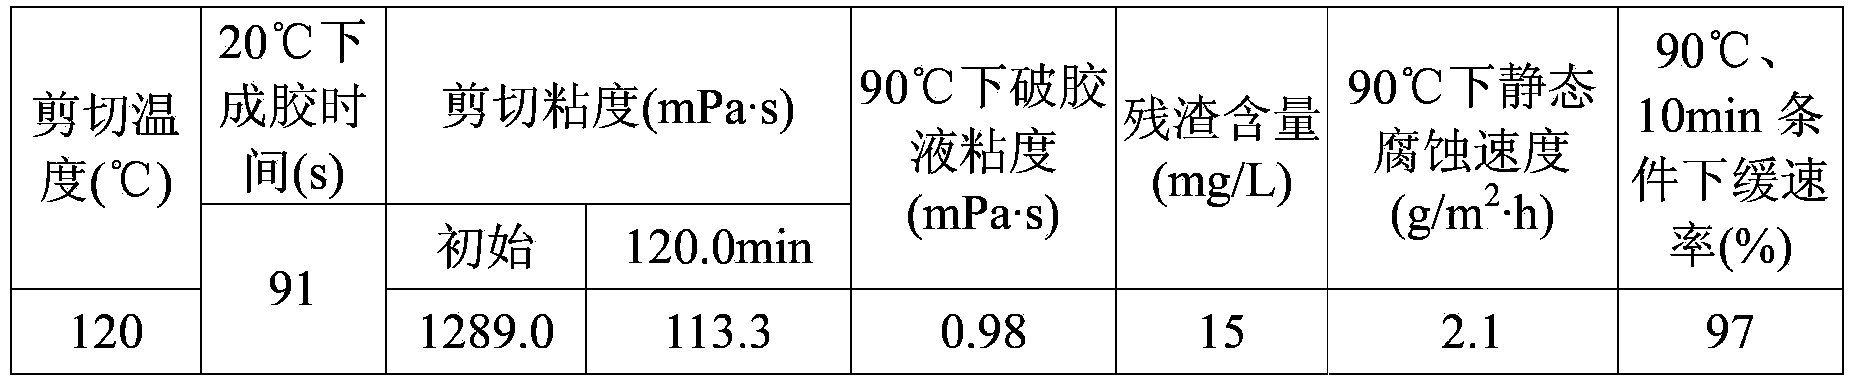 High-temperature-resistant ground cross-linked acid liquor and preparation method thereof